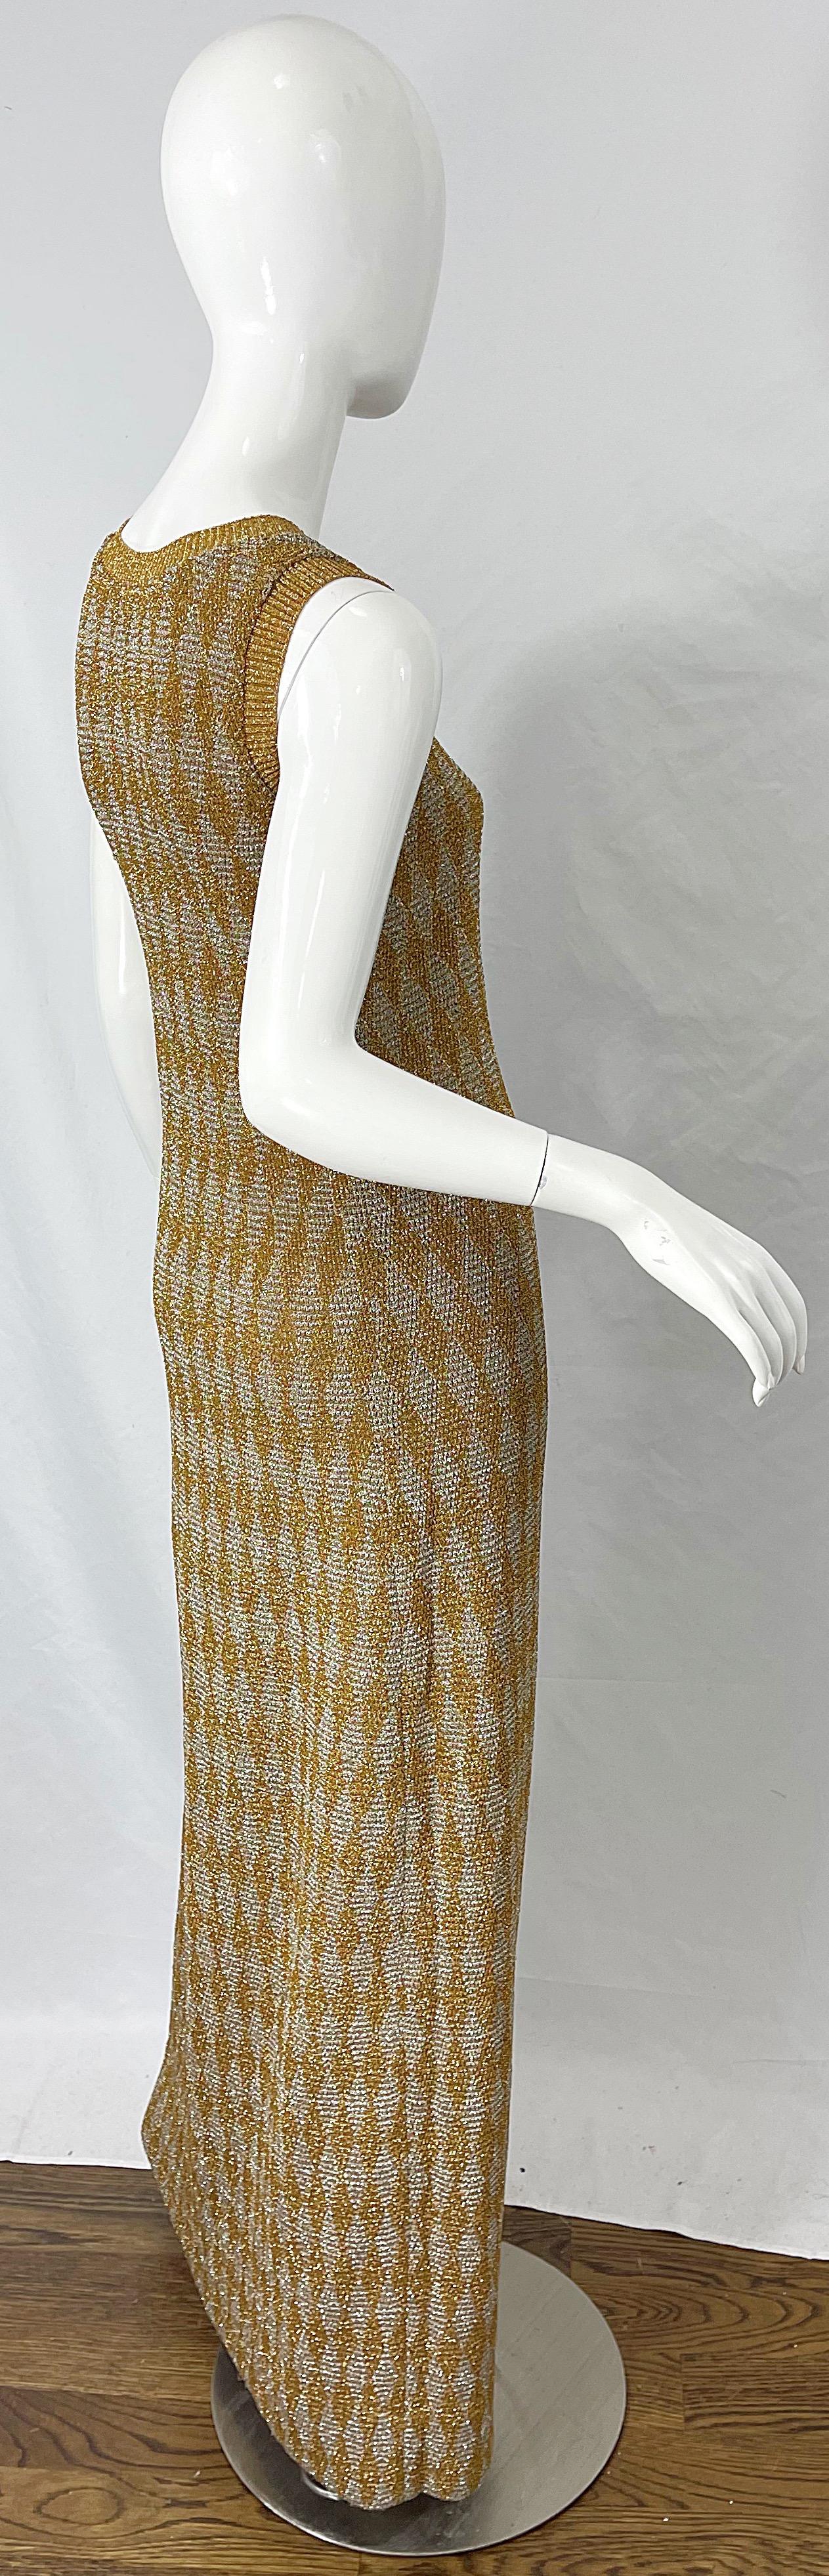 NWT 1970s Halston MET Museum Gold Silver 70s Vintage Lurex Gown + Duster Sweater For Sale 2